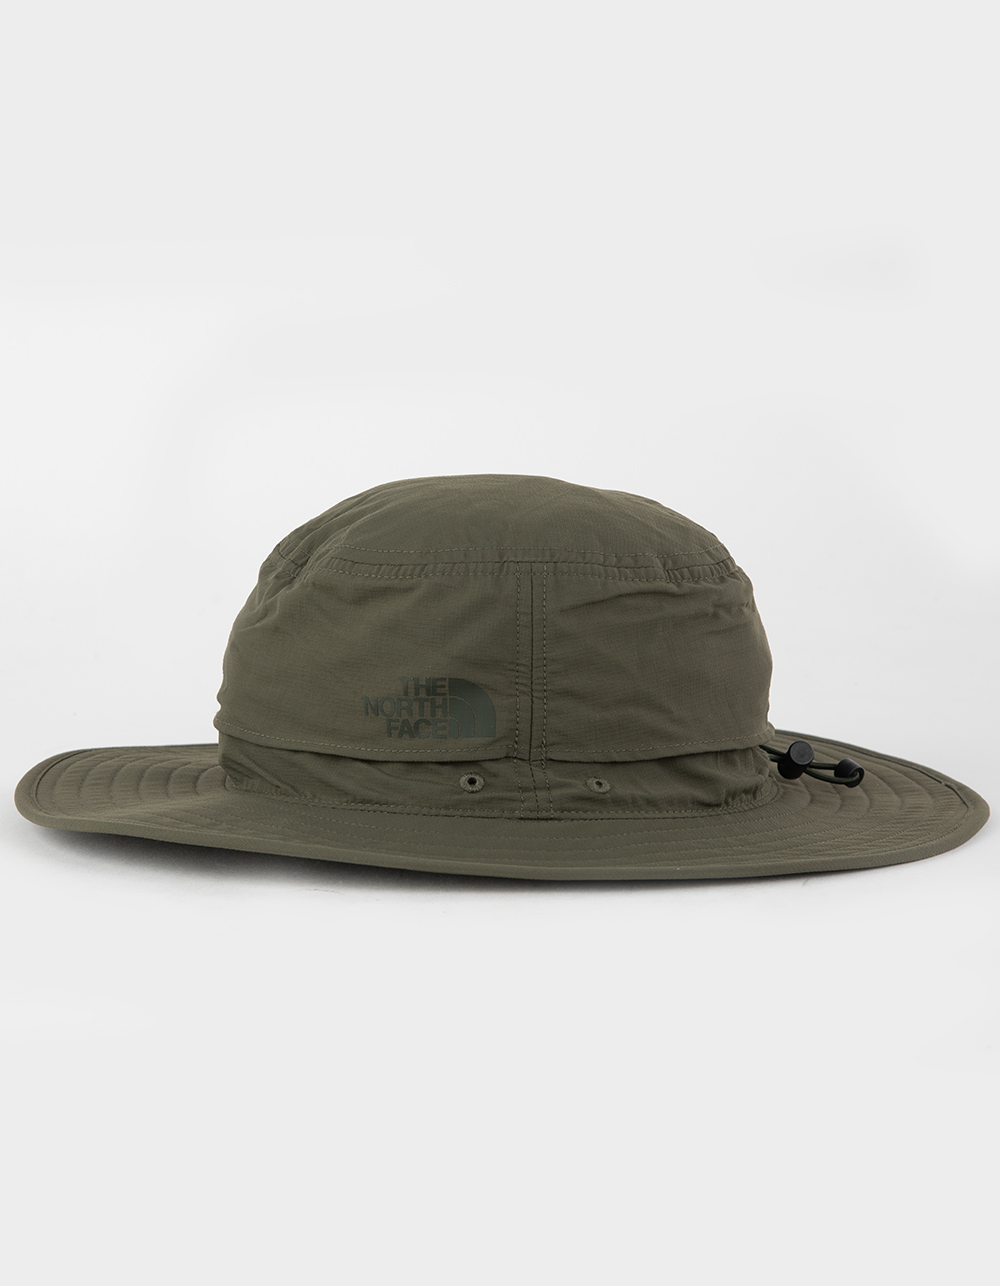 The North Face Horizon Breeze Brimmer Hat - New Taupe Green - S/M